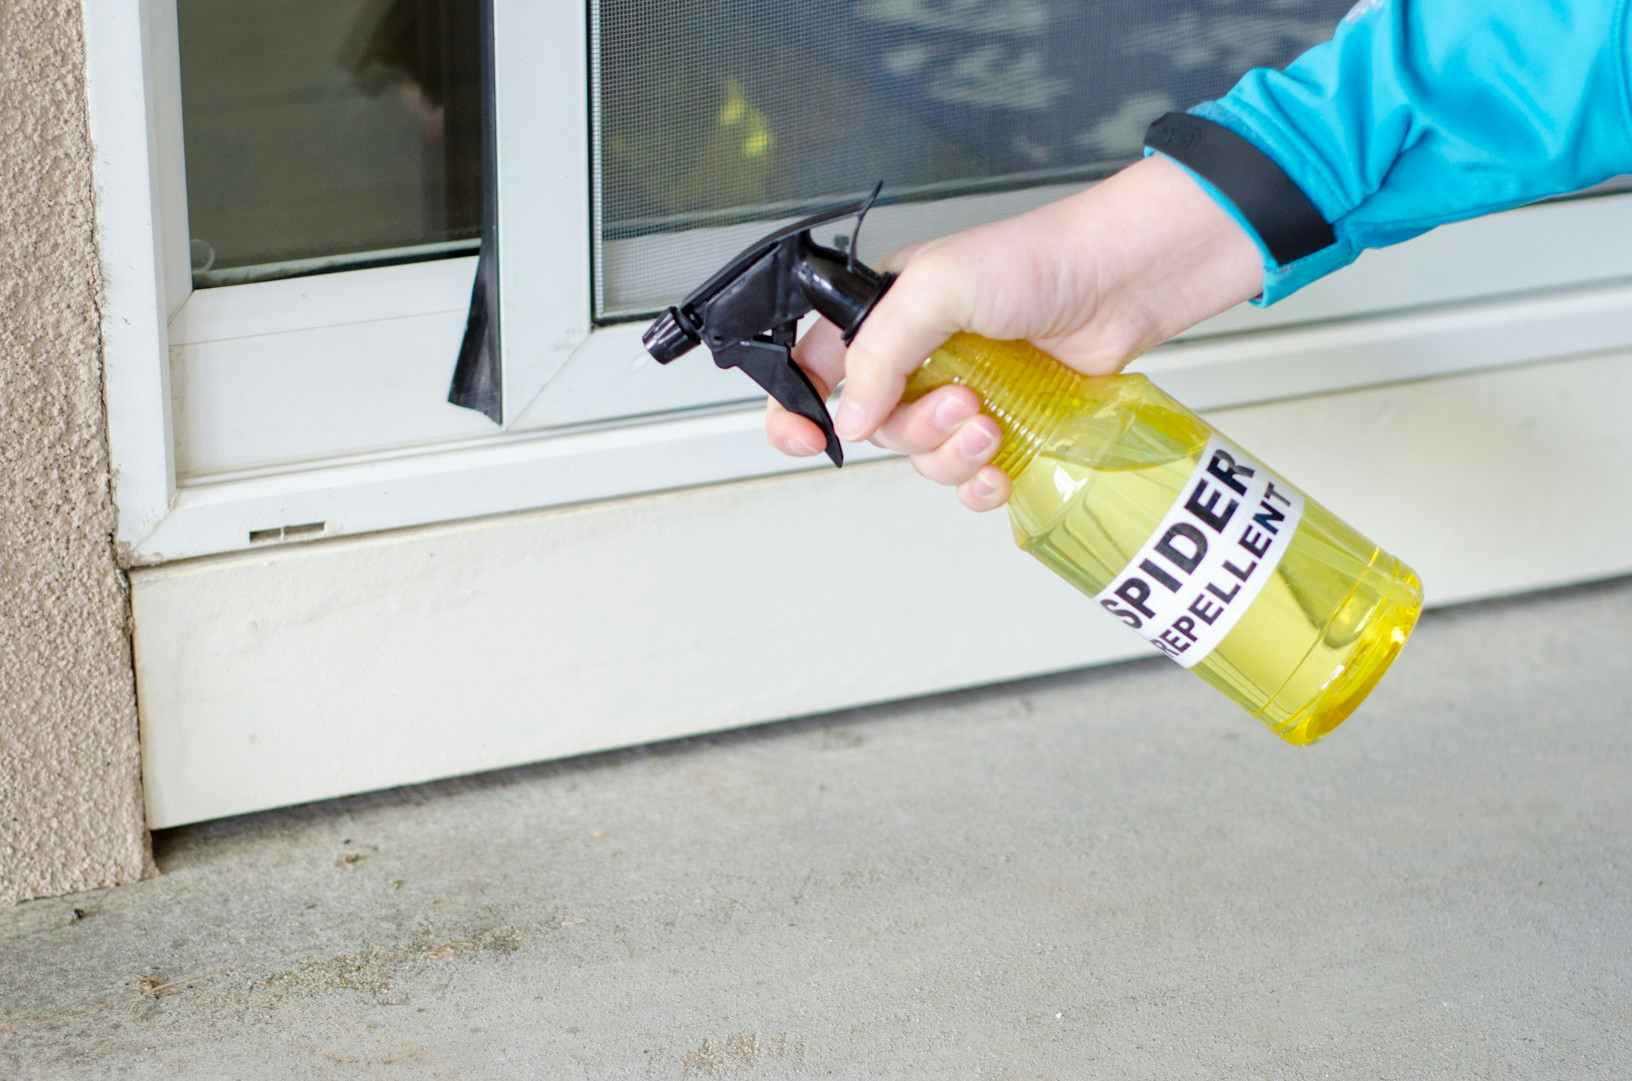 Someone spraying a bottle labeled "Spider Repellent" to the cracks under a doorway